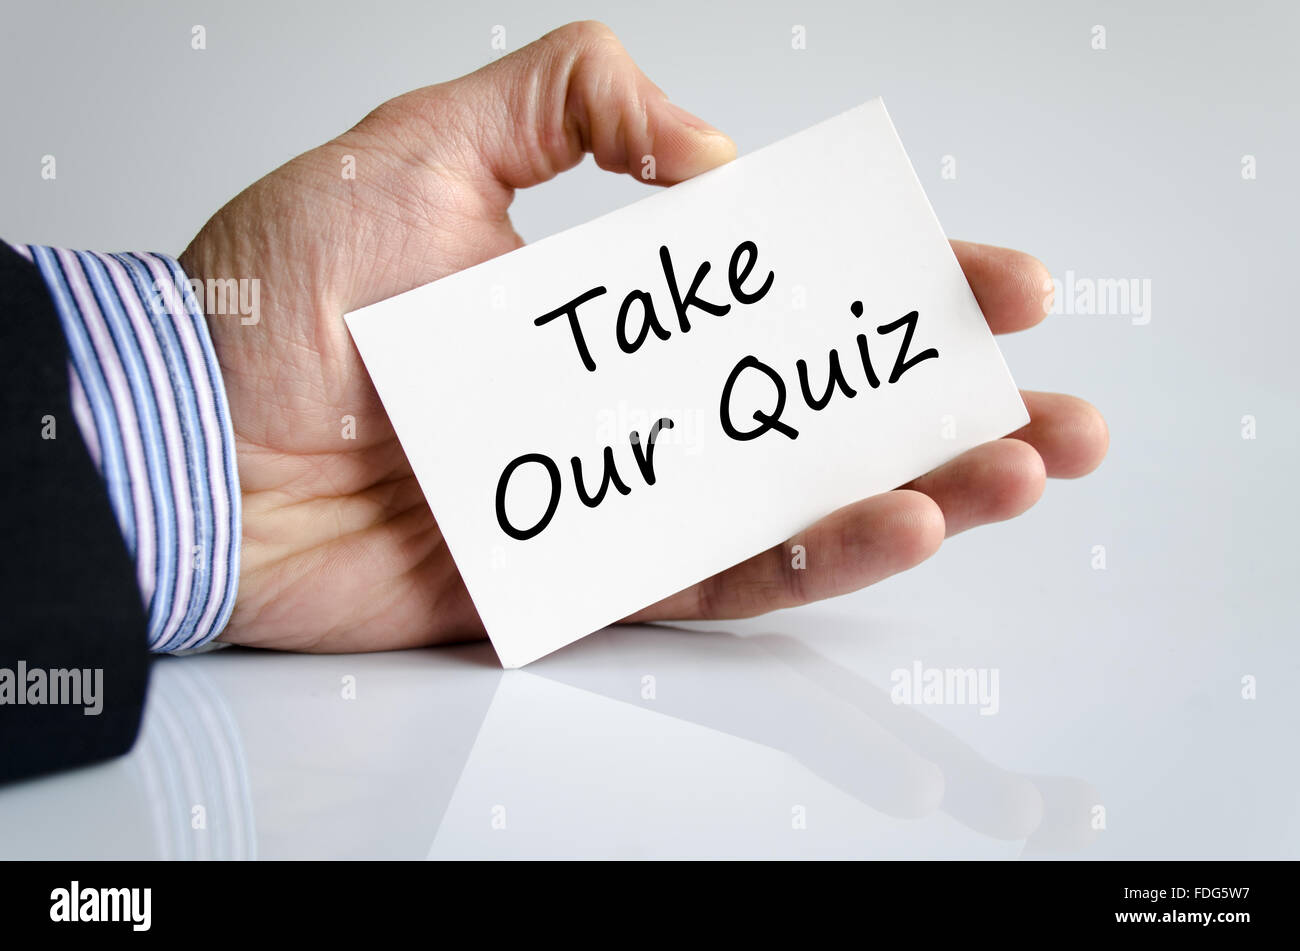 Take our quiz text concept isolated over white background Stock Photo